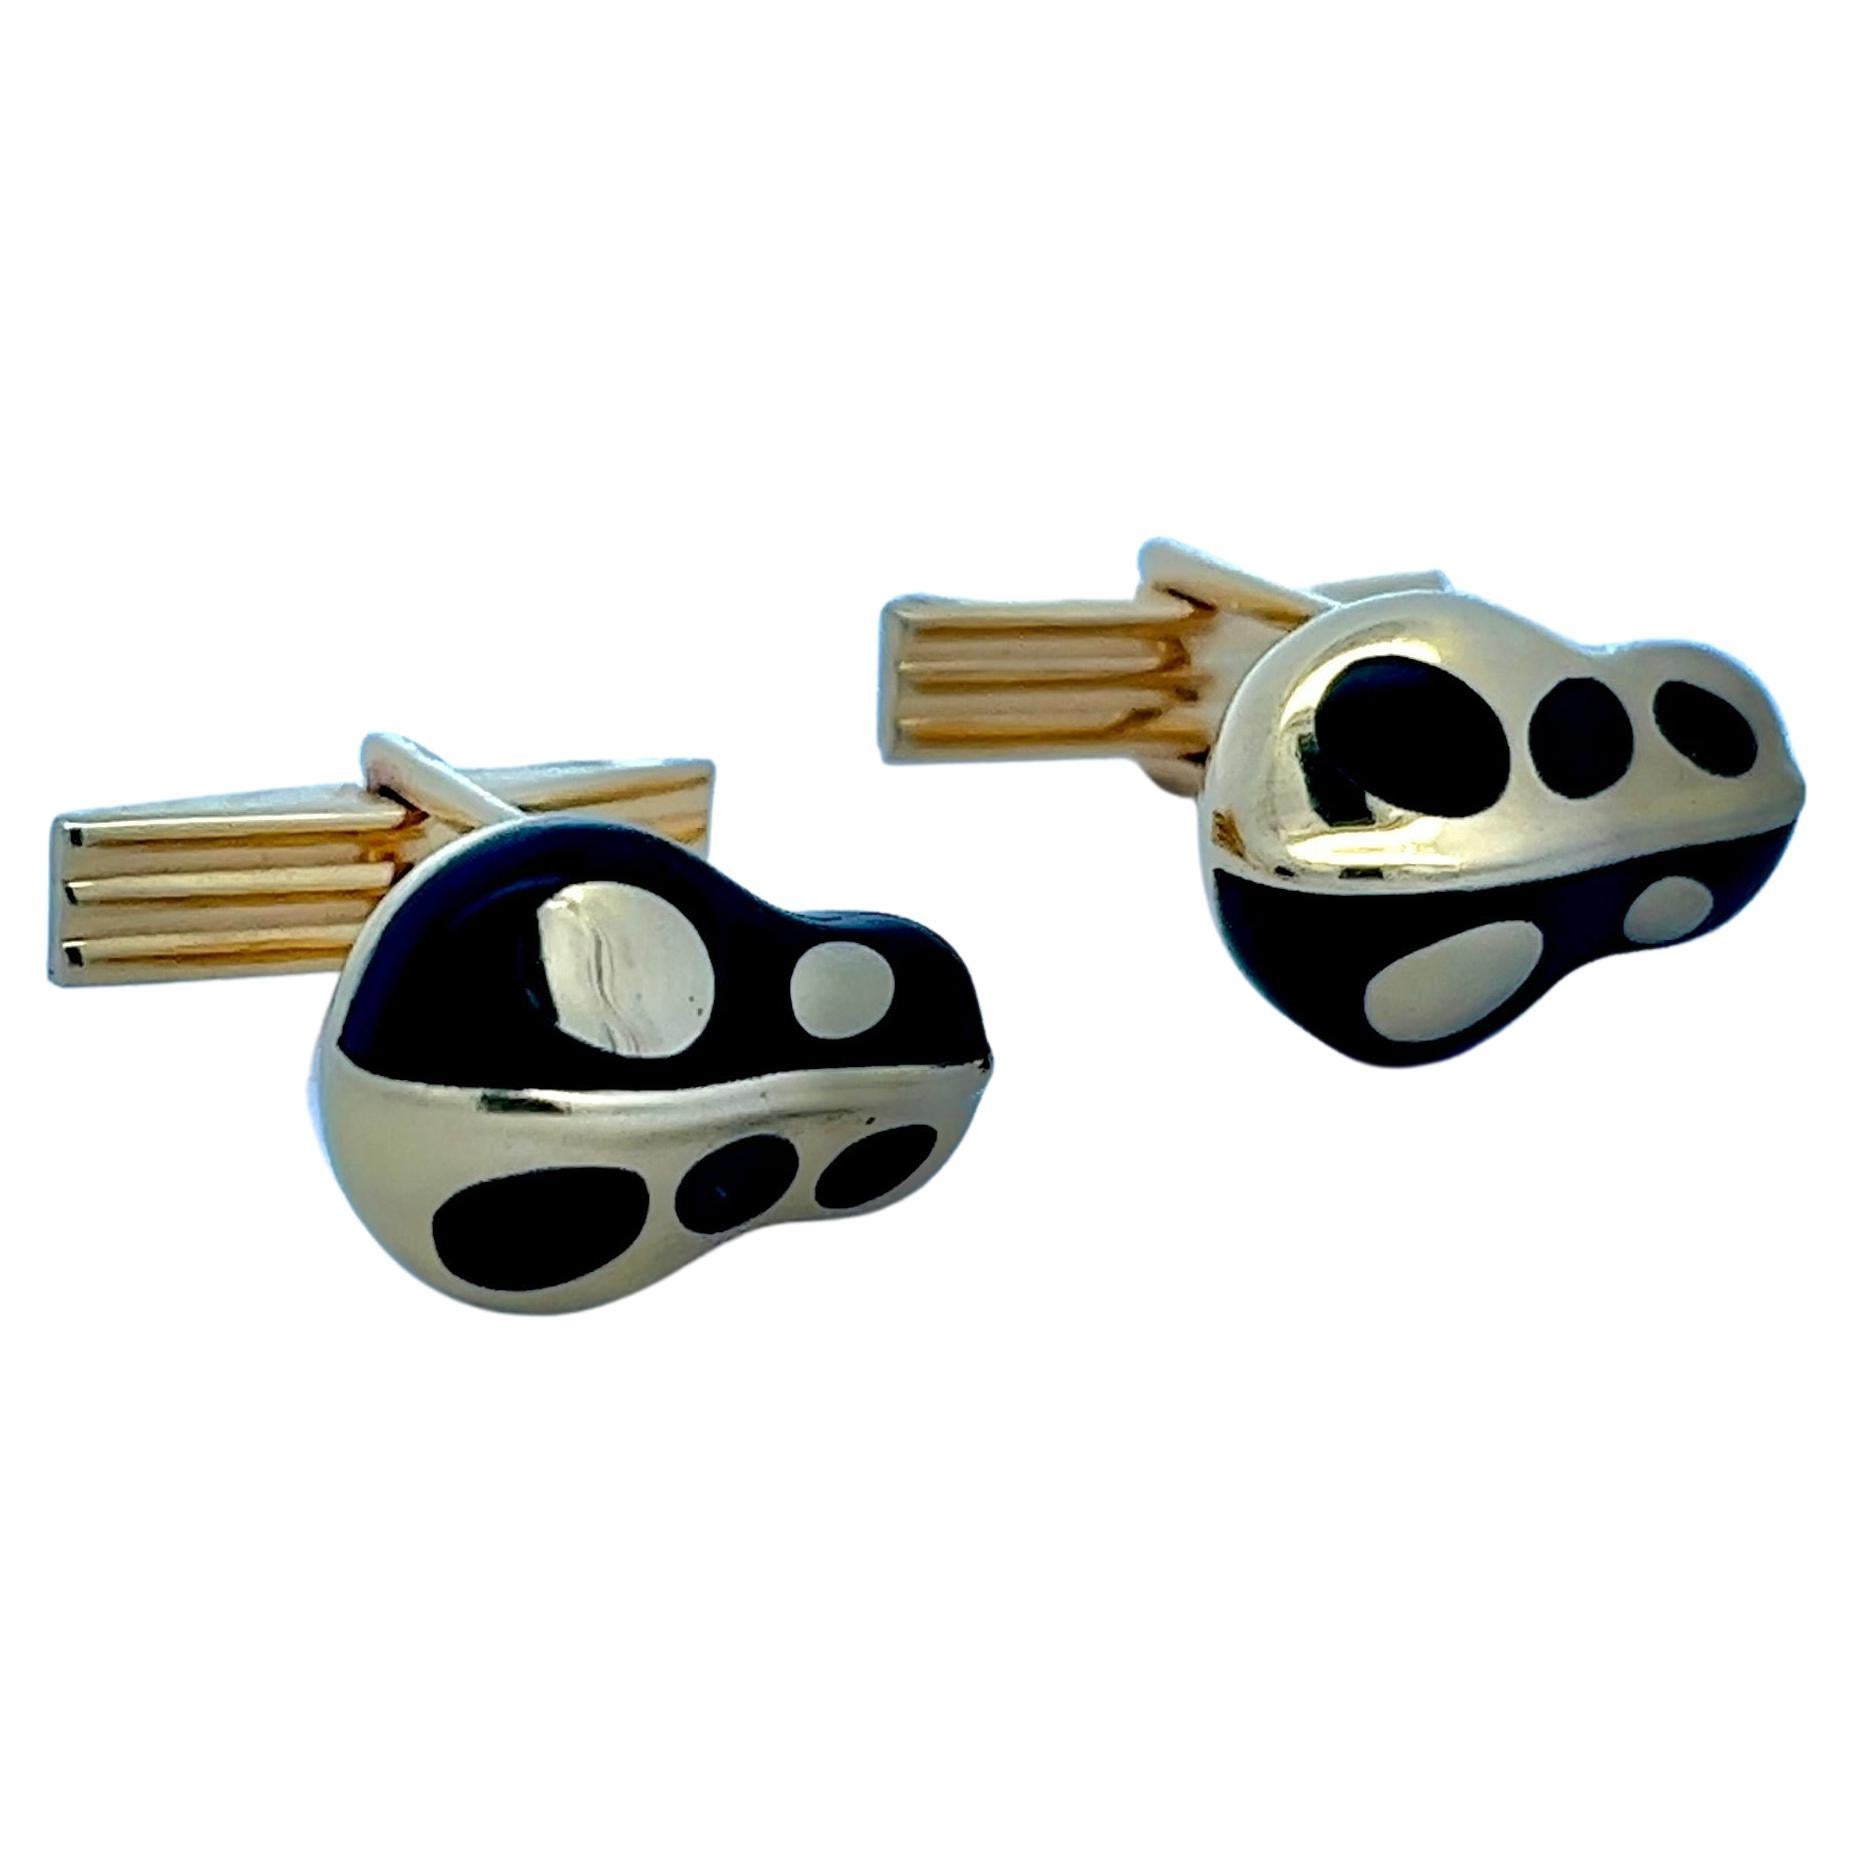 These meticulously crafted cufflinks is a rare piece from the esteemed Asch Grossbardt collection. These cufflinks, with their harmonious blend of yellow gold and inlaid onyx, are emblematic of the brand's aesthetic. The design, subtly reminiscent